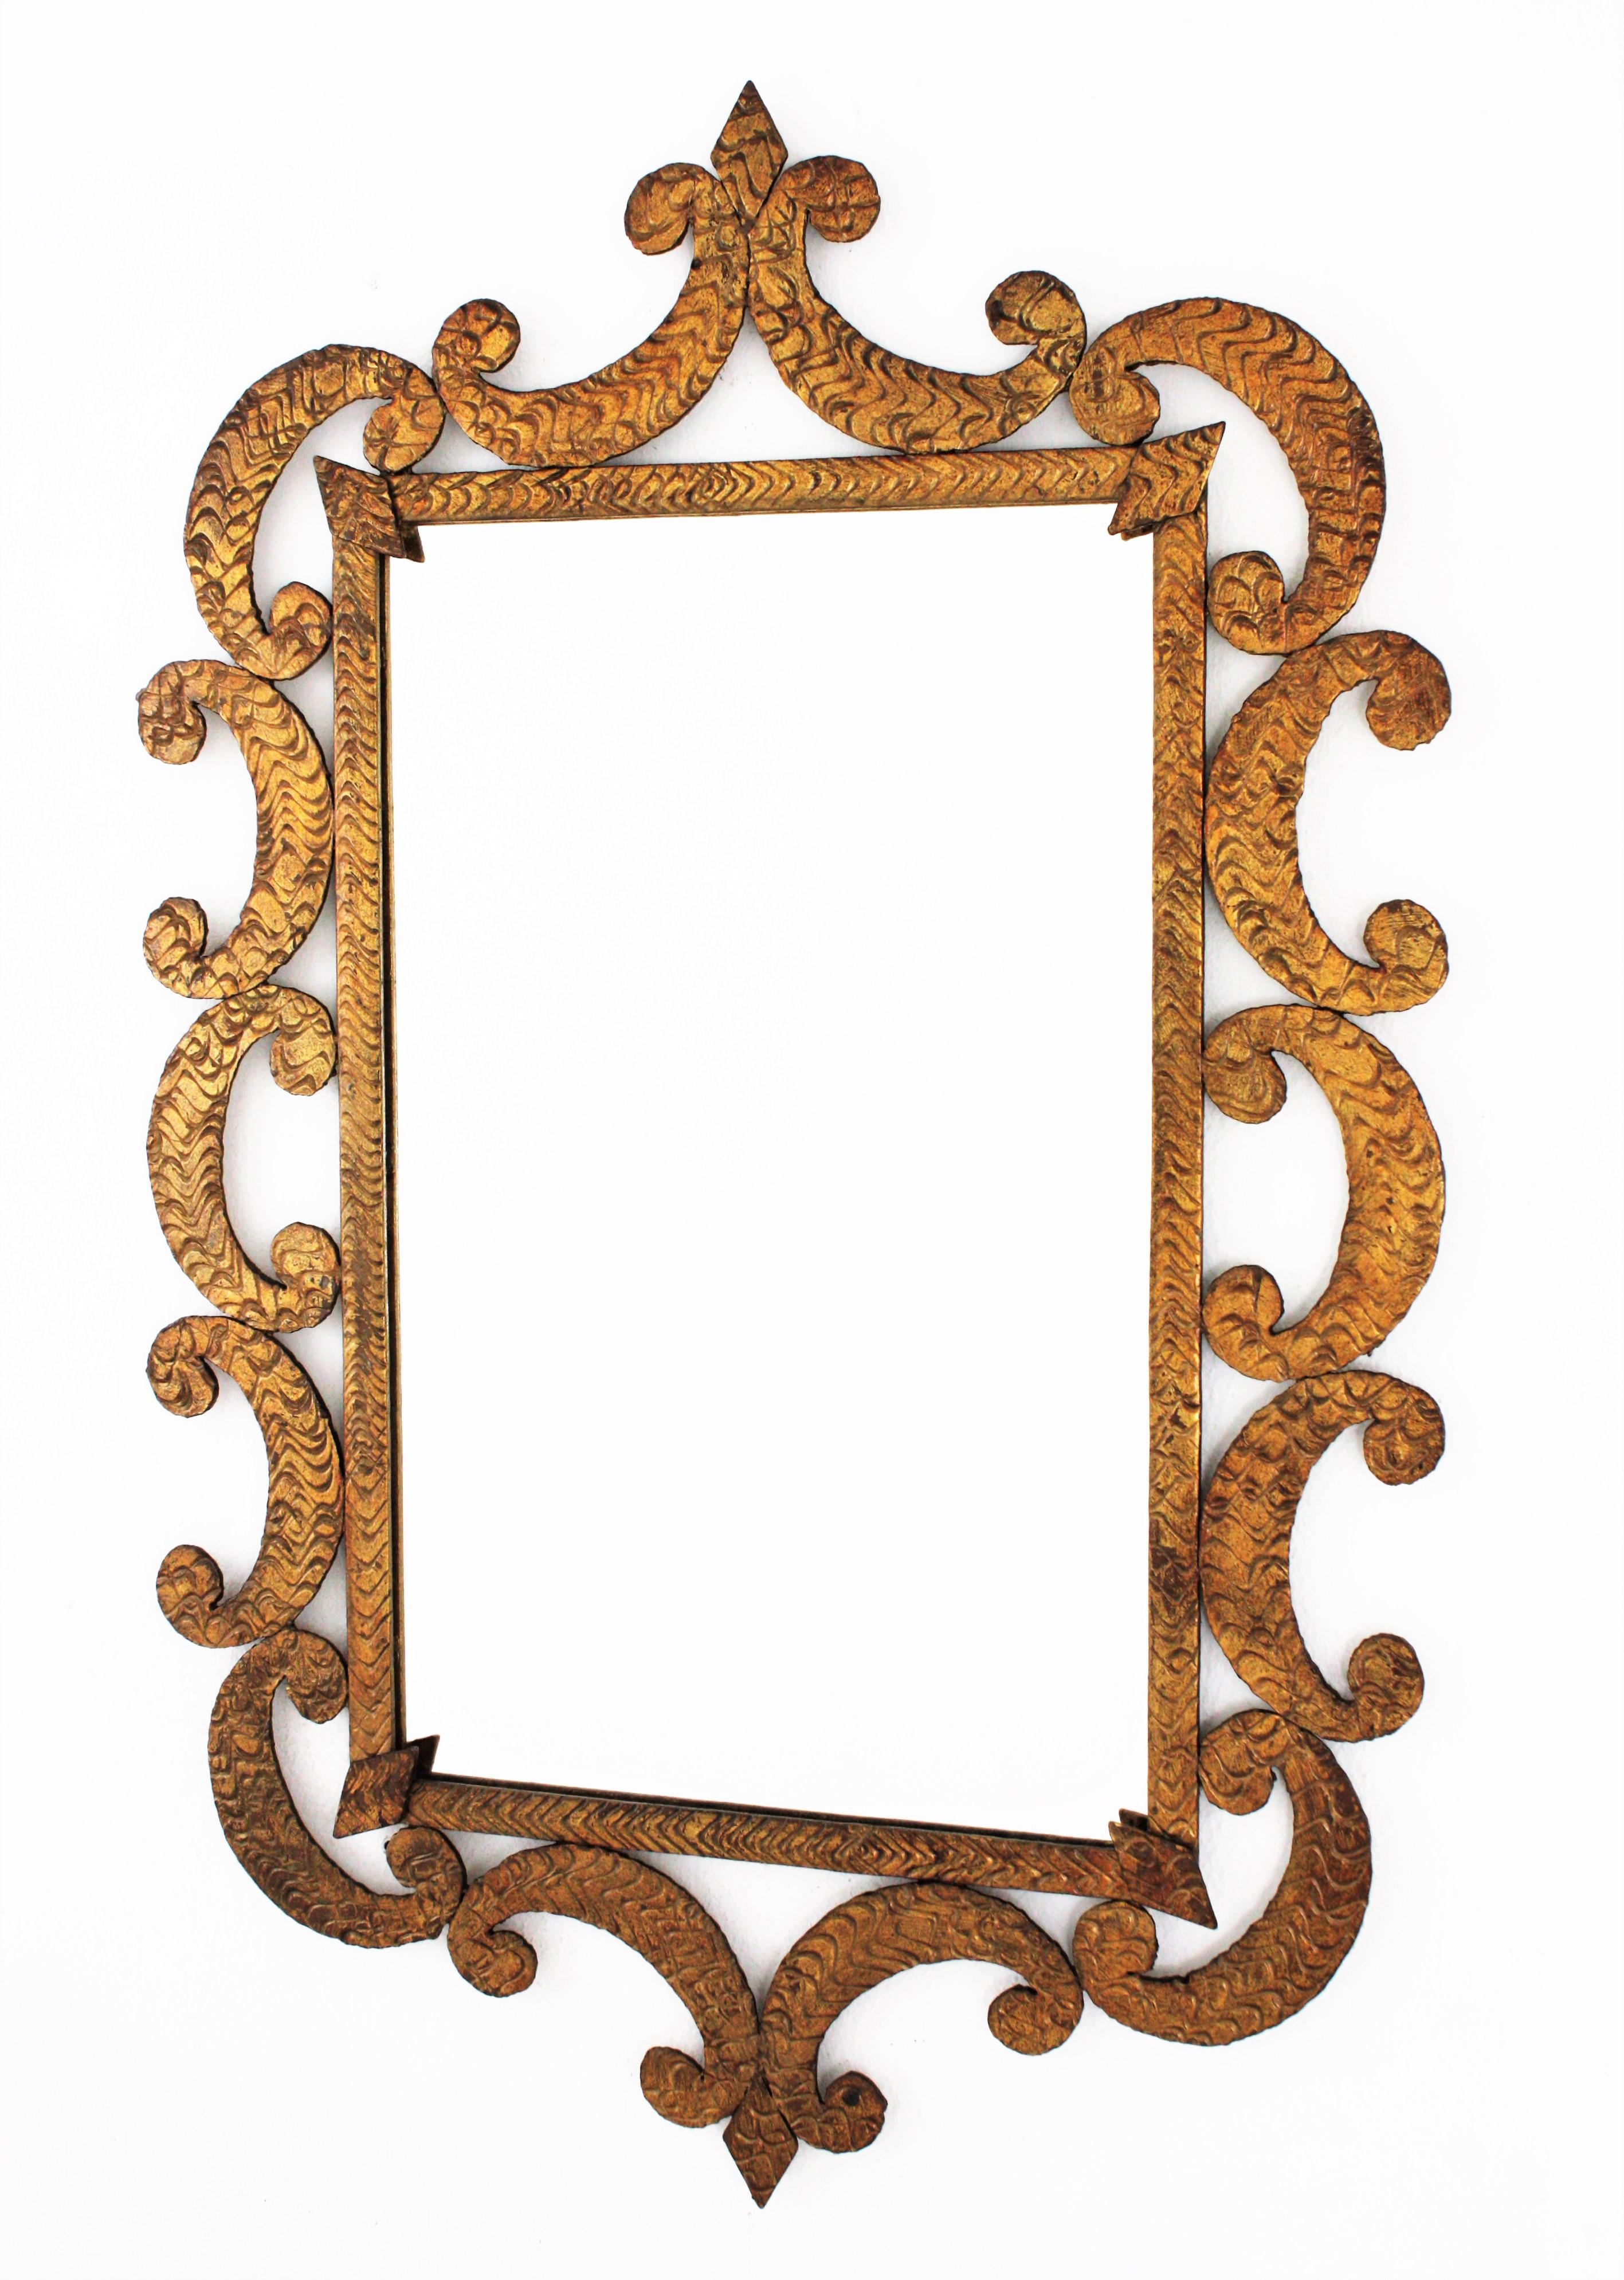 Hammered Art Deco Wrought Gilt Iron Mirror with Scroll Detailing, France, 1930s